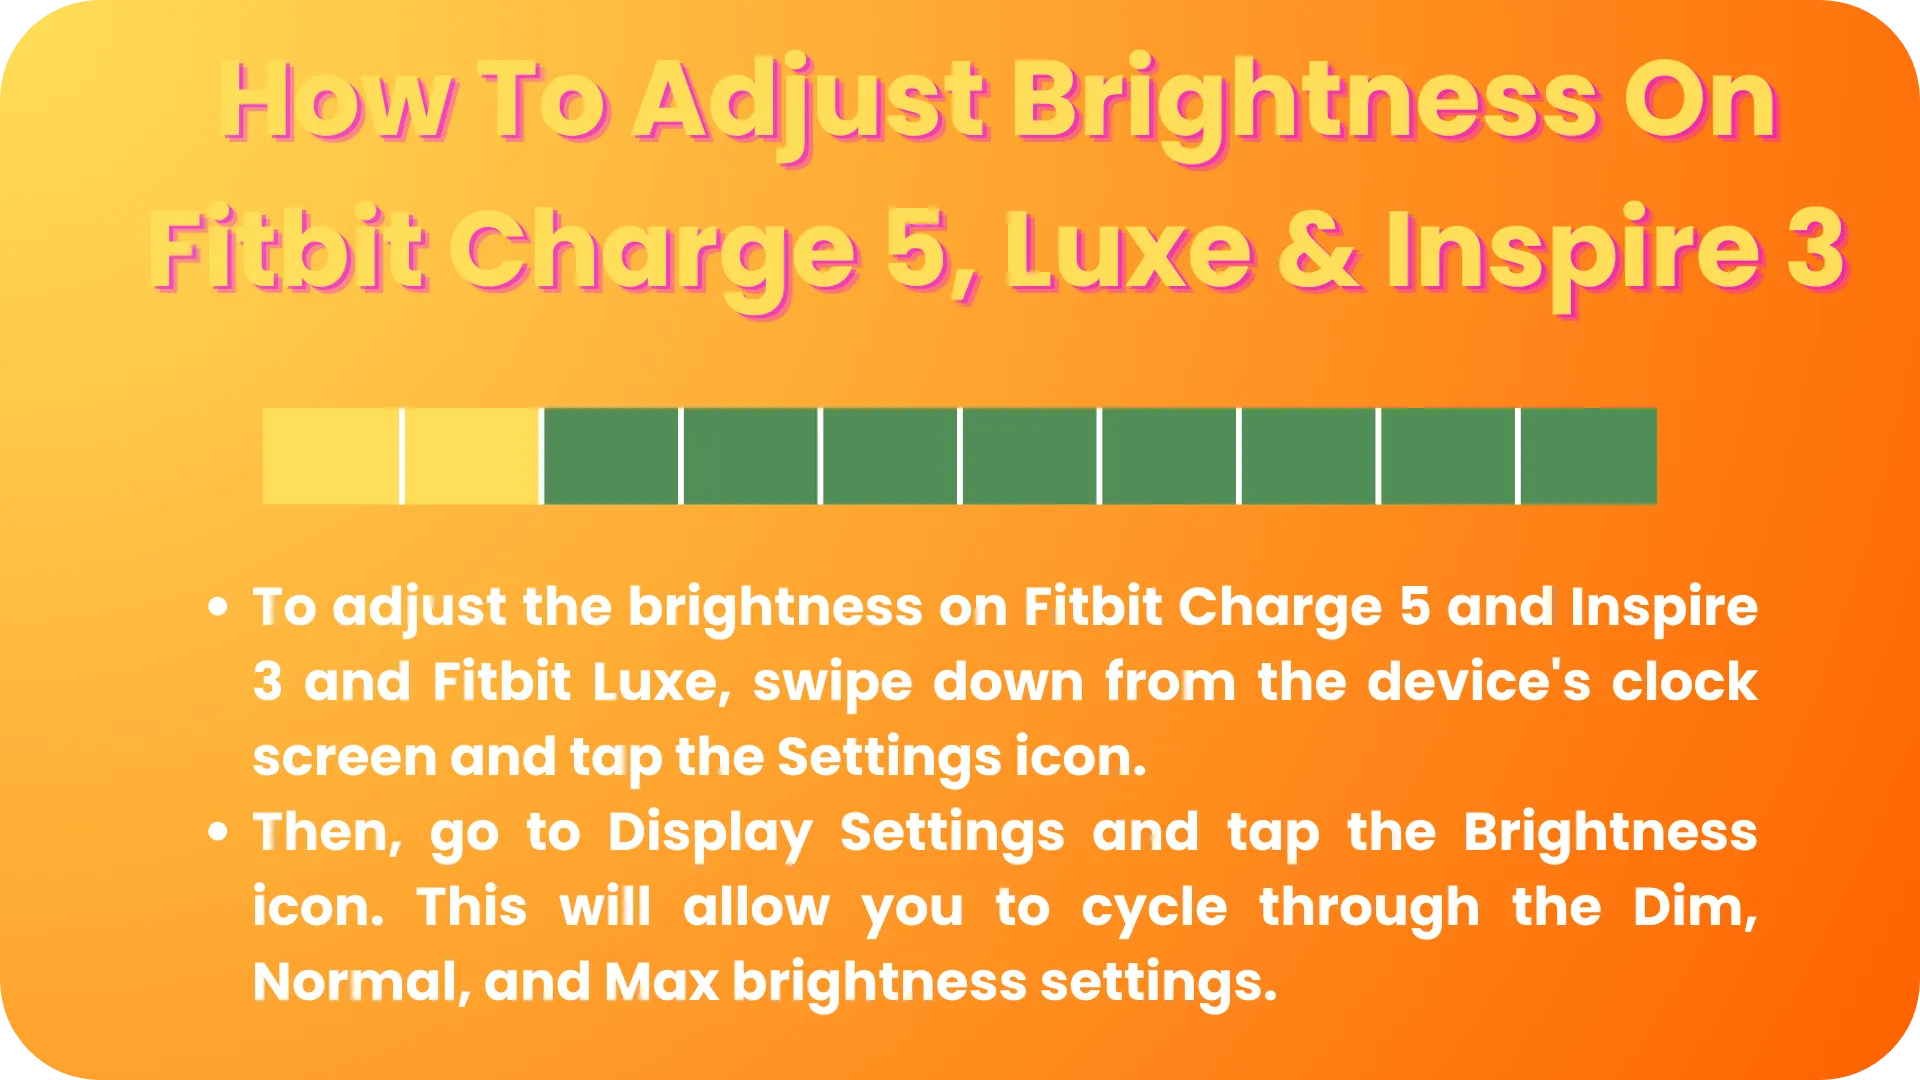 How To Adjust Brightness on Fitbit Charge 5, Fitbit Luxe, Fitbit Inspire 3